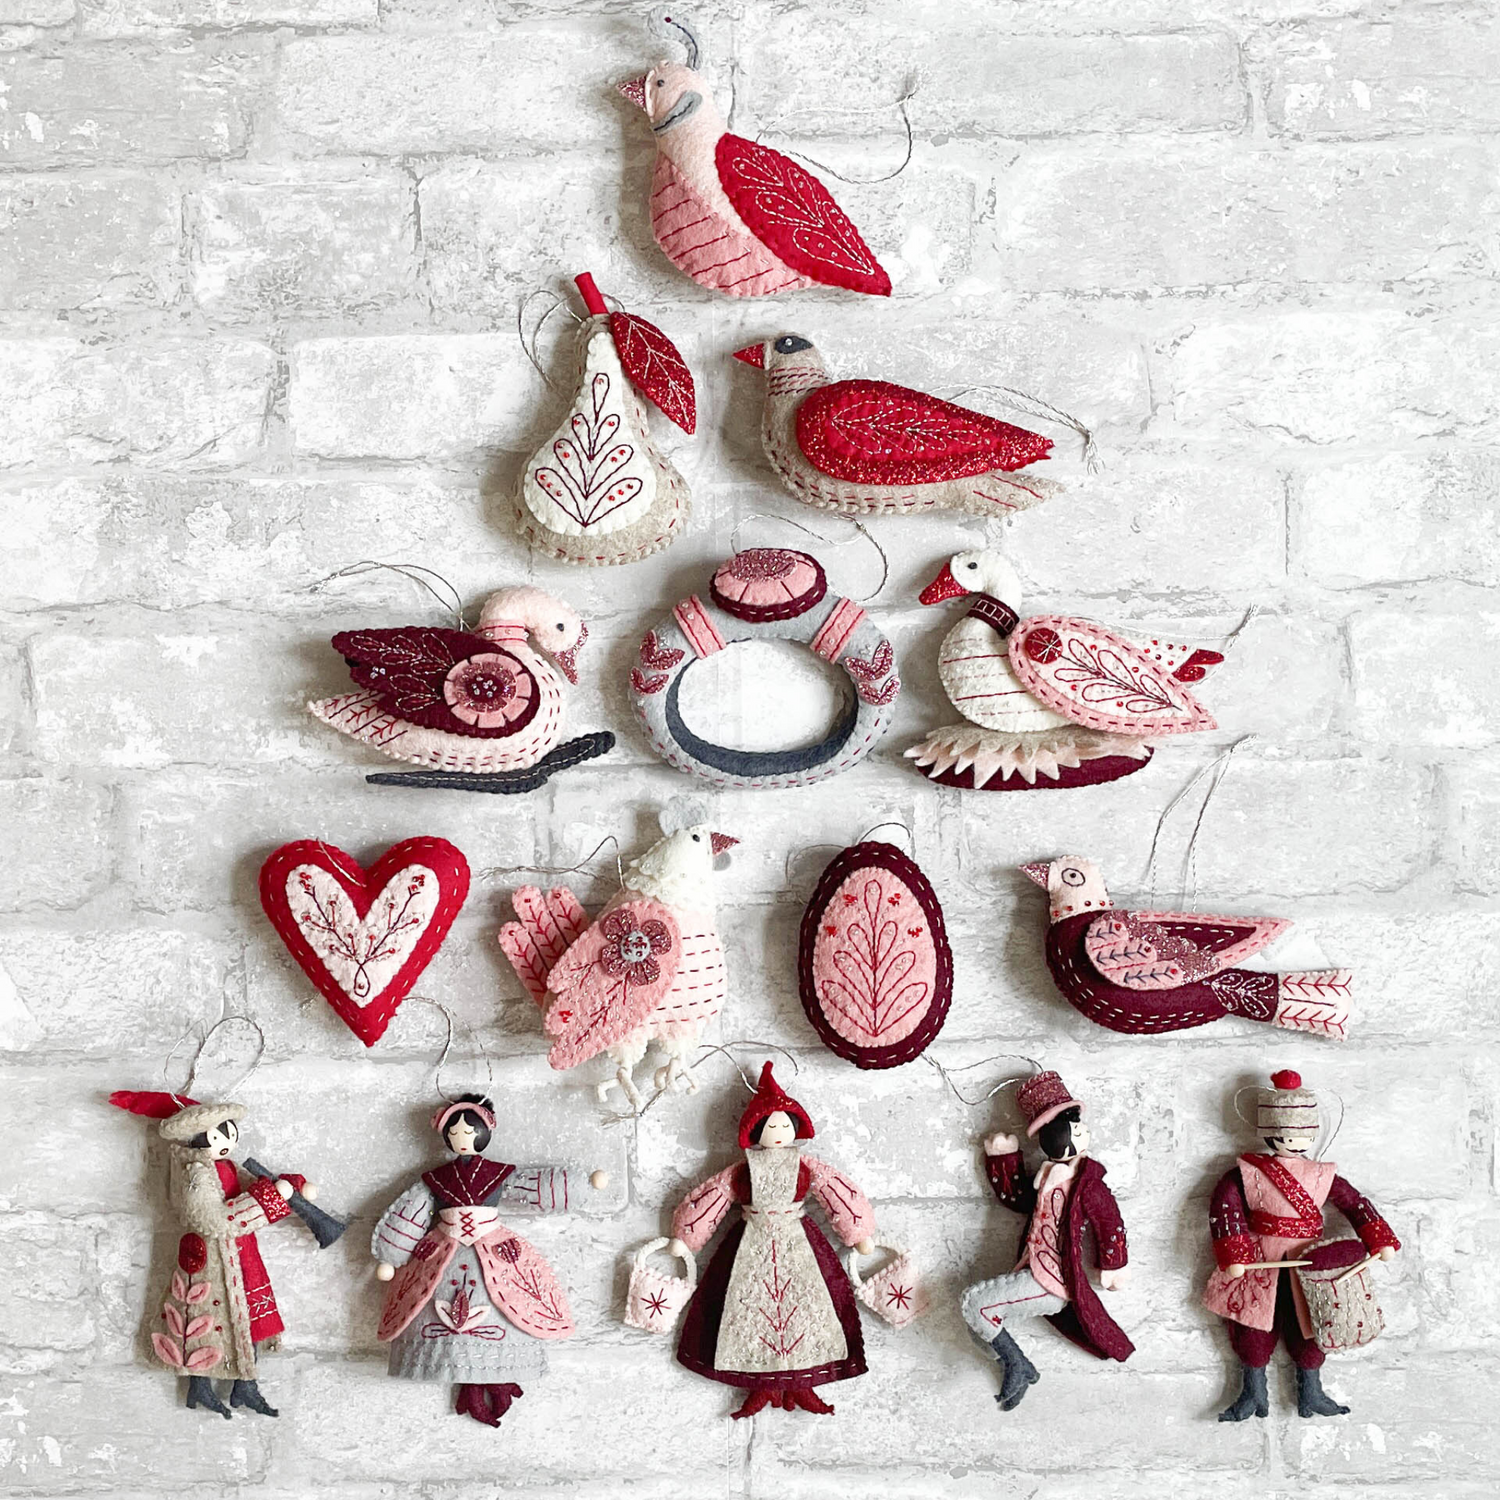 Phot of the Twelve Days of Christmas Ornaments in the Winter Cardinals Premium Felt Palette